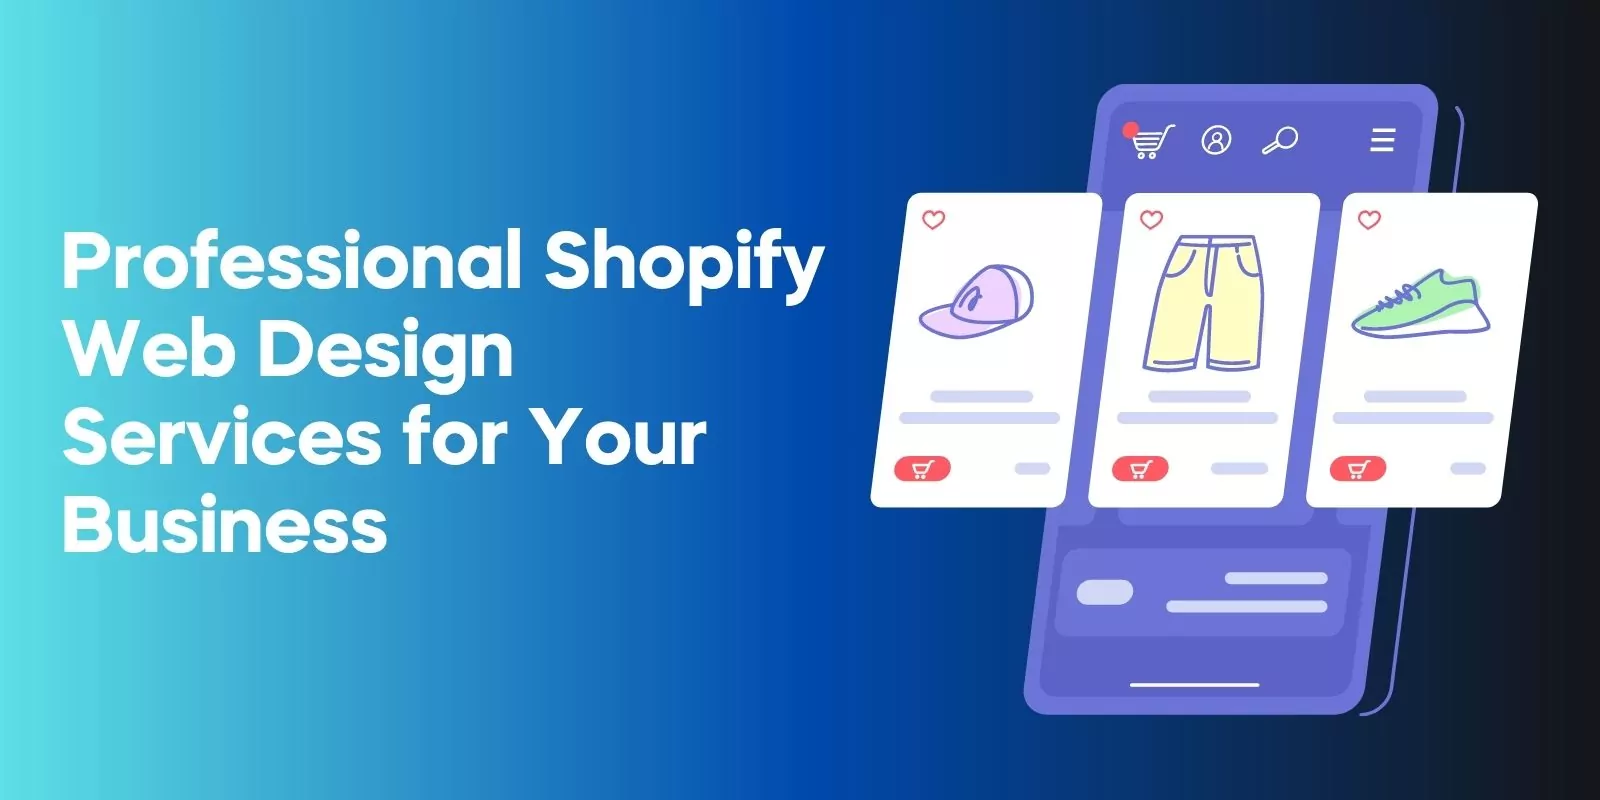 Professional Shopify Web Design Services for Your Business